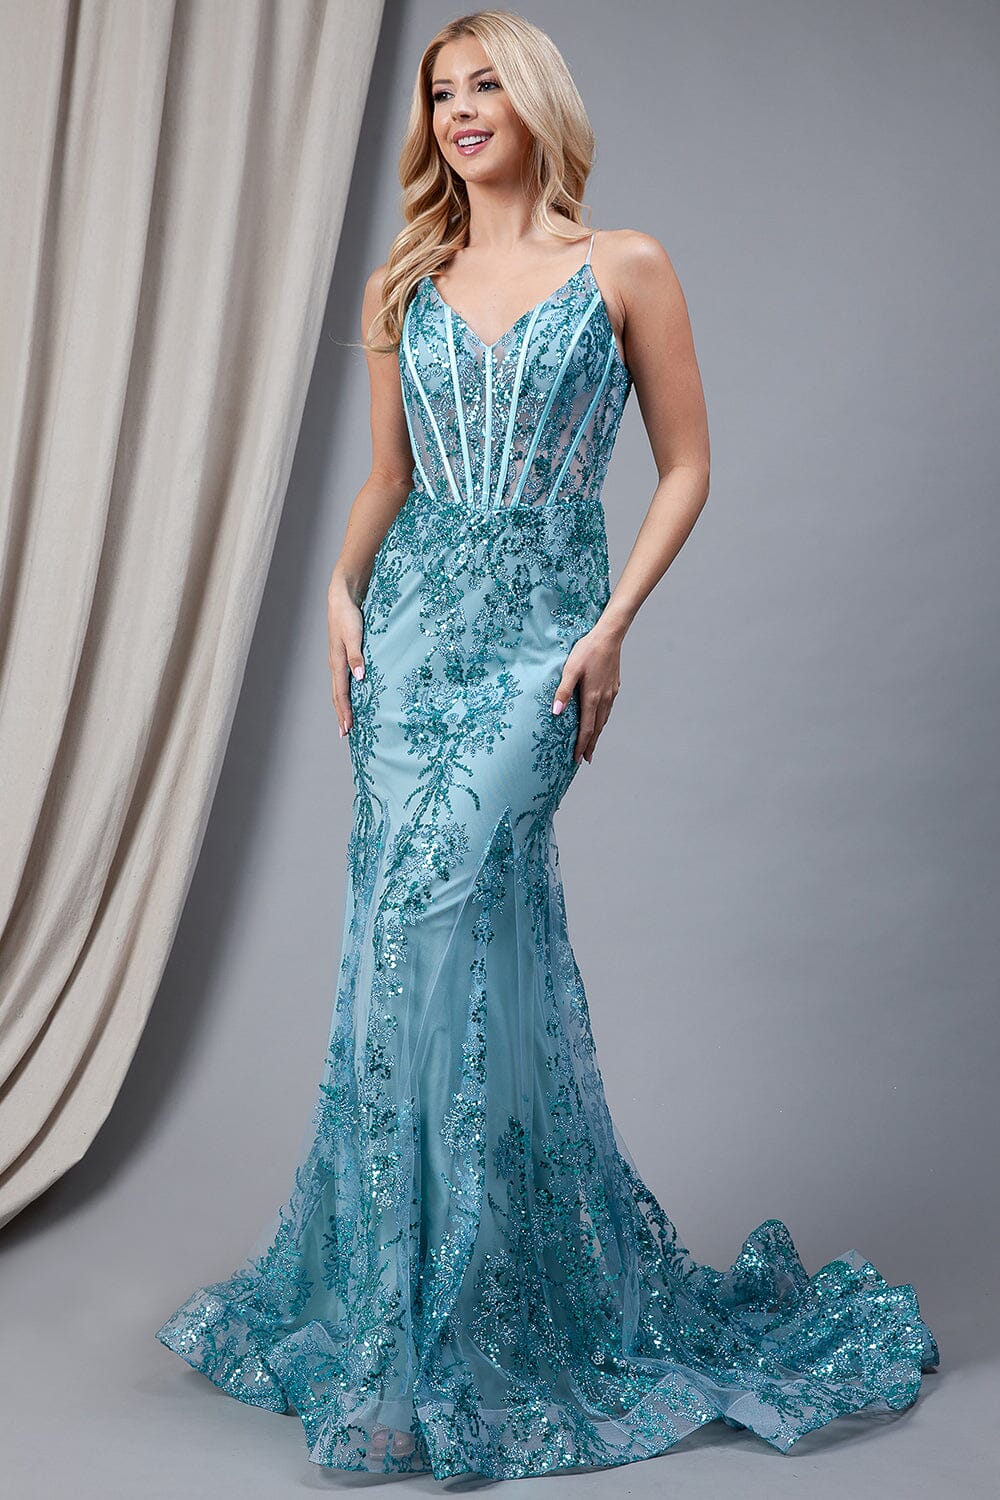 Glitter Print V-Neck Mermaid Gown by Amelia Couture BZ015